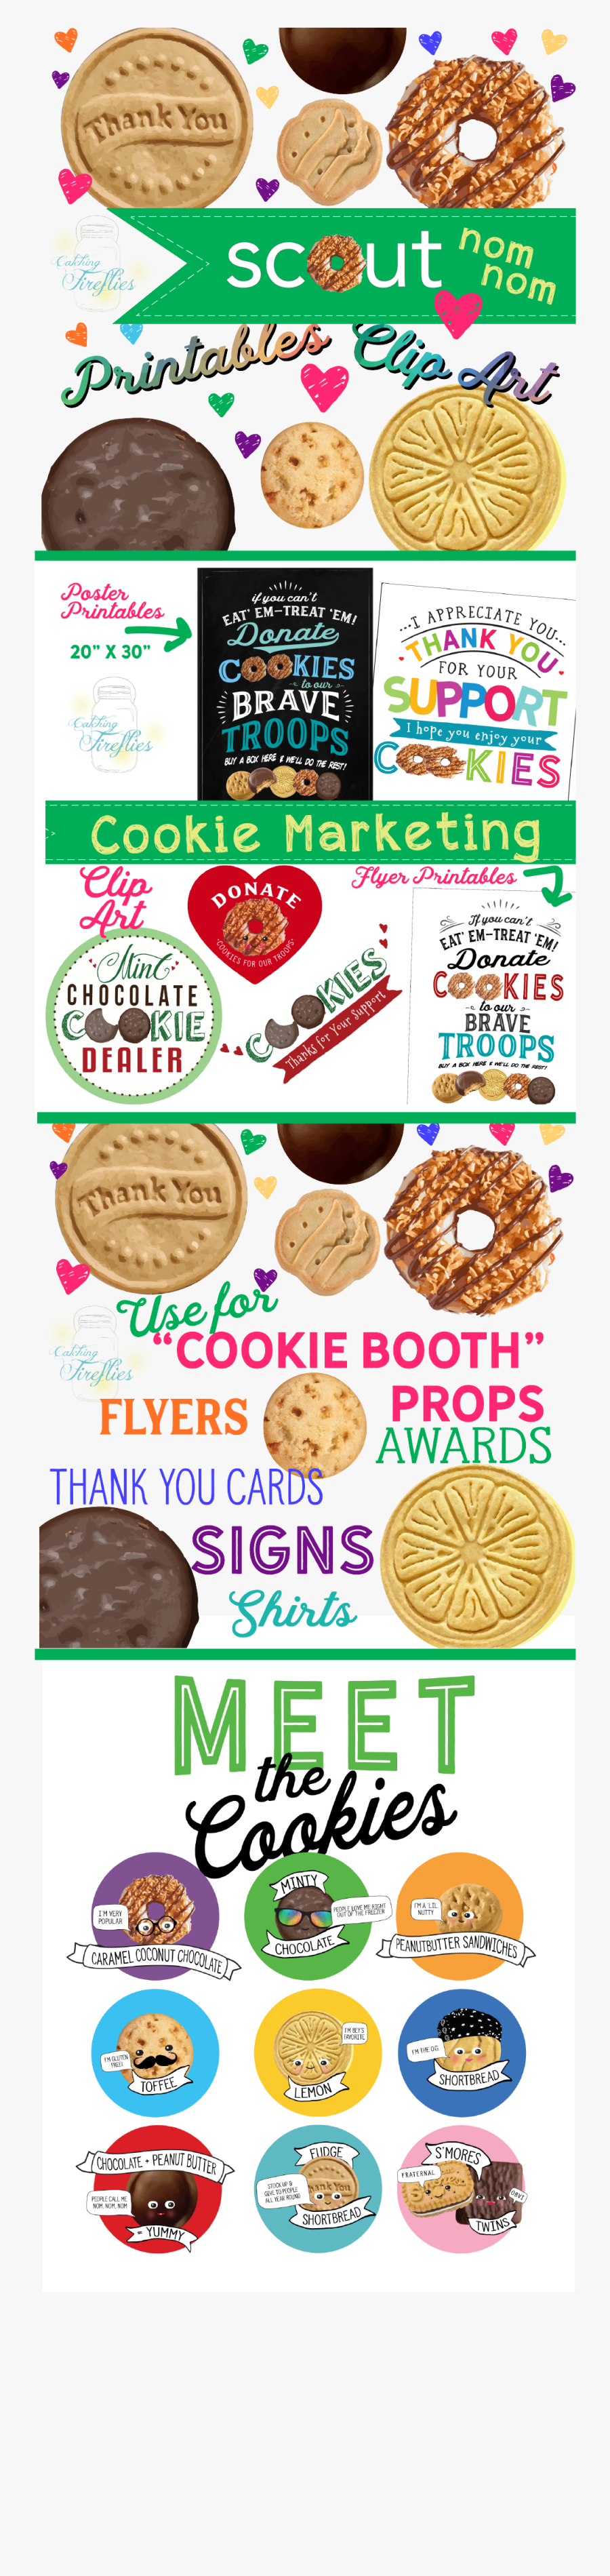 Girl Scout Cookies 2012 Flavors, Transparent Clipart